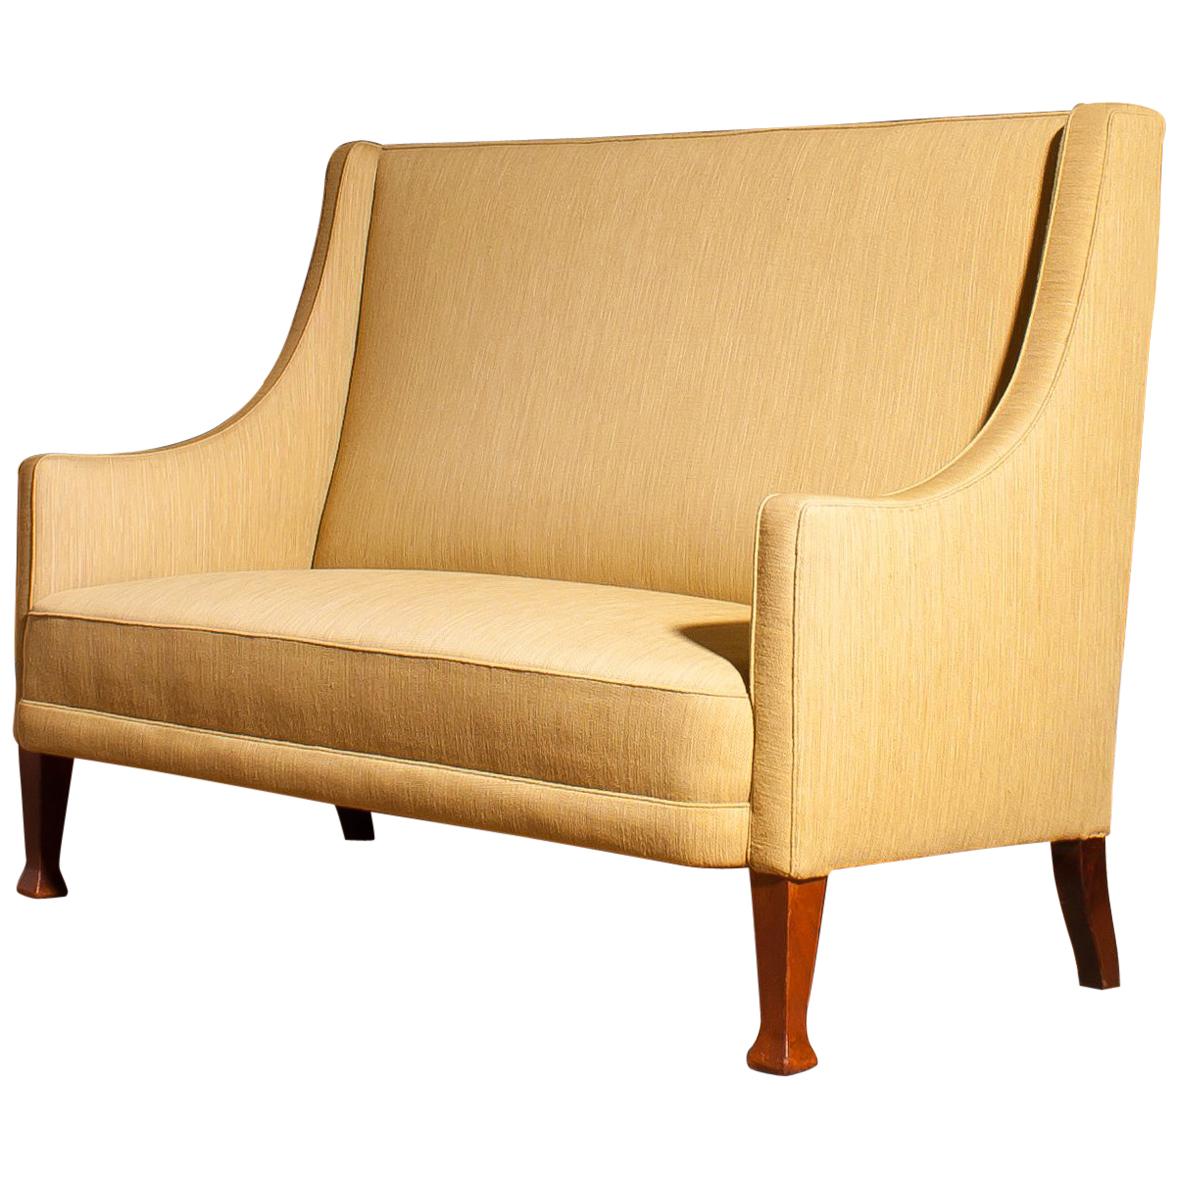 Beautiful high back sofa couch made in Denmark.
The sofa is made of a light yellow fabric on a wooden frame.
It is in a wonderful original condition,
period 1950s.
Dimensions: H 108 cm, W 148 cm, D 75 cm, SH 46 cm.